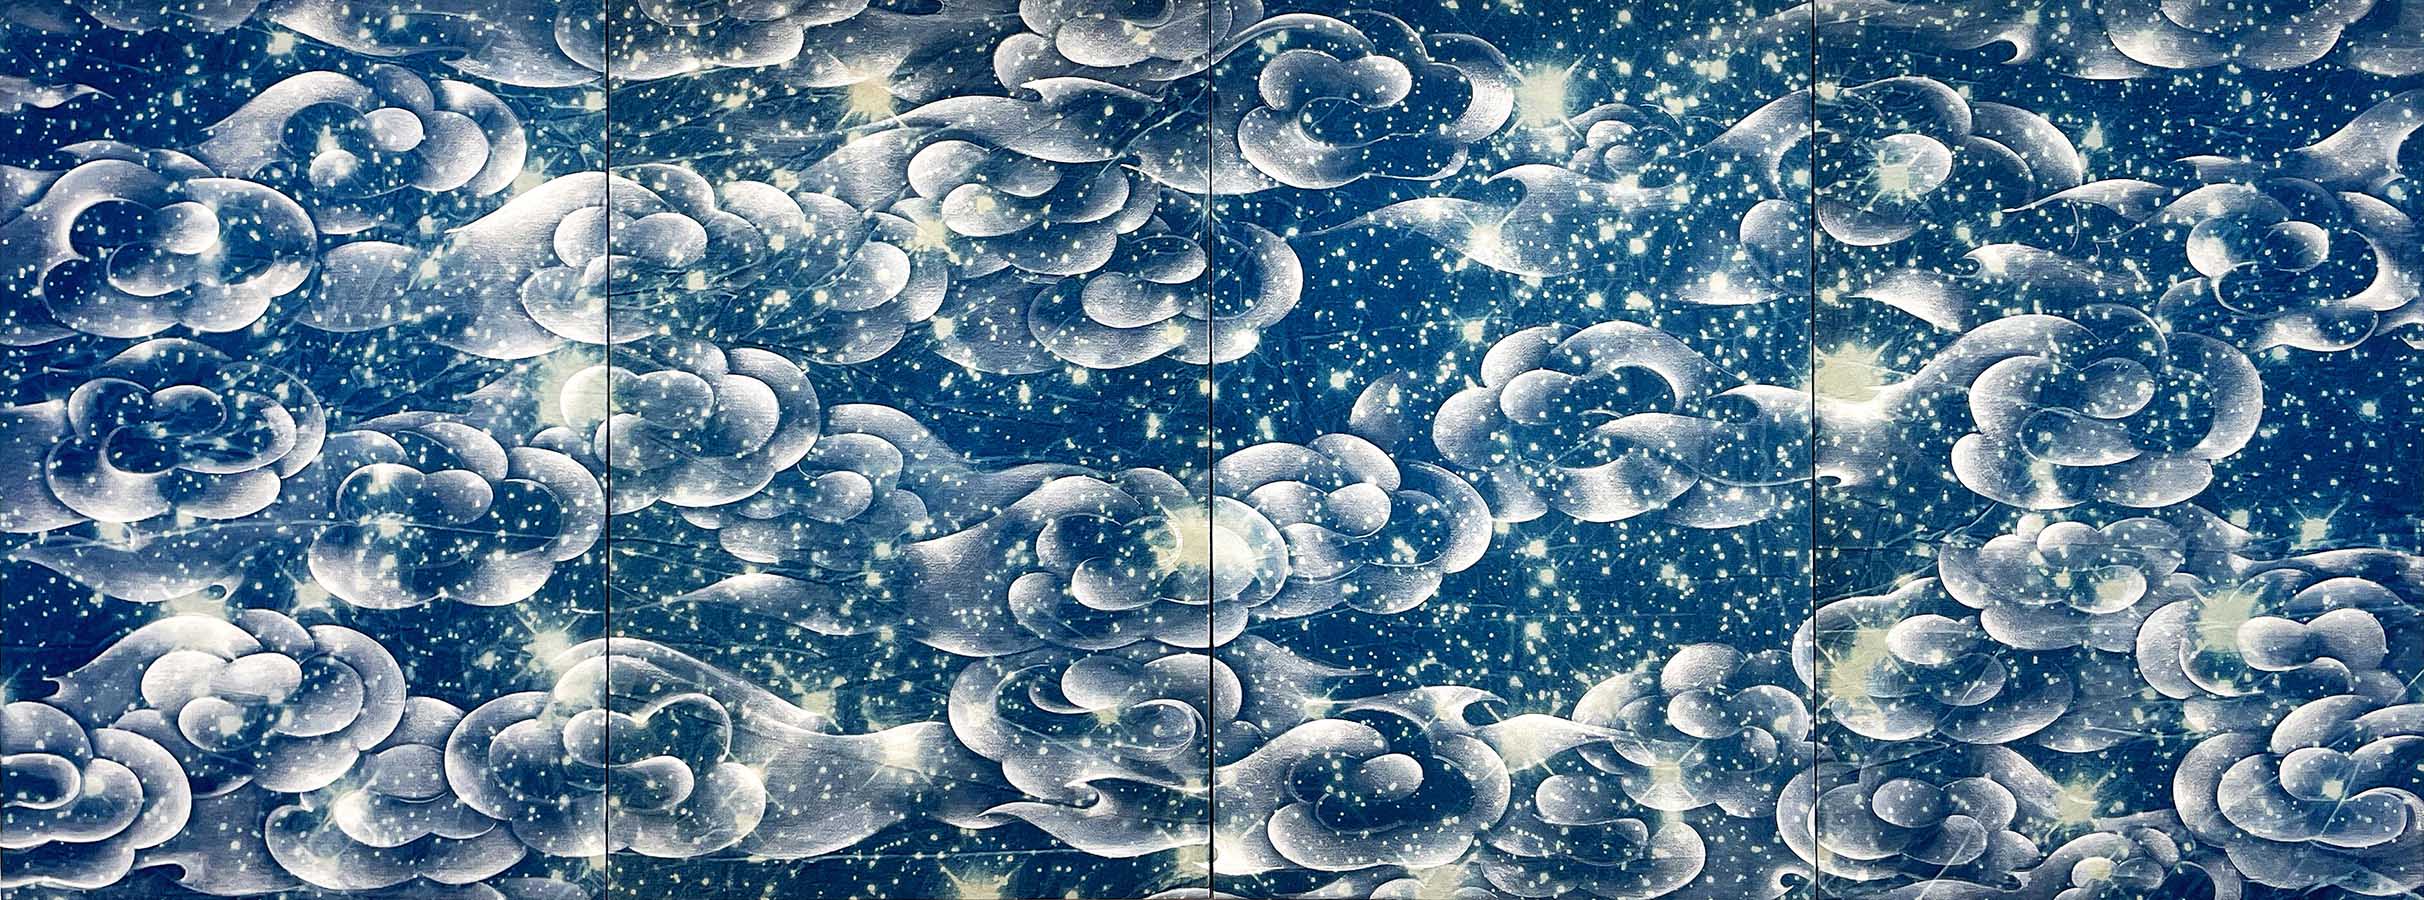 Ala Ebtekar - Zenith (IX) (SOLD), 2022, acrylic over cyanotype exposed by sunlight on canvas, 30 x 80 inches overall (4 panels: 30 x 20 inches each)